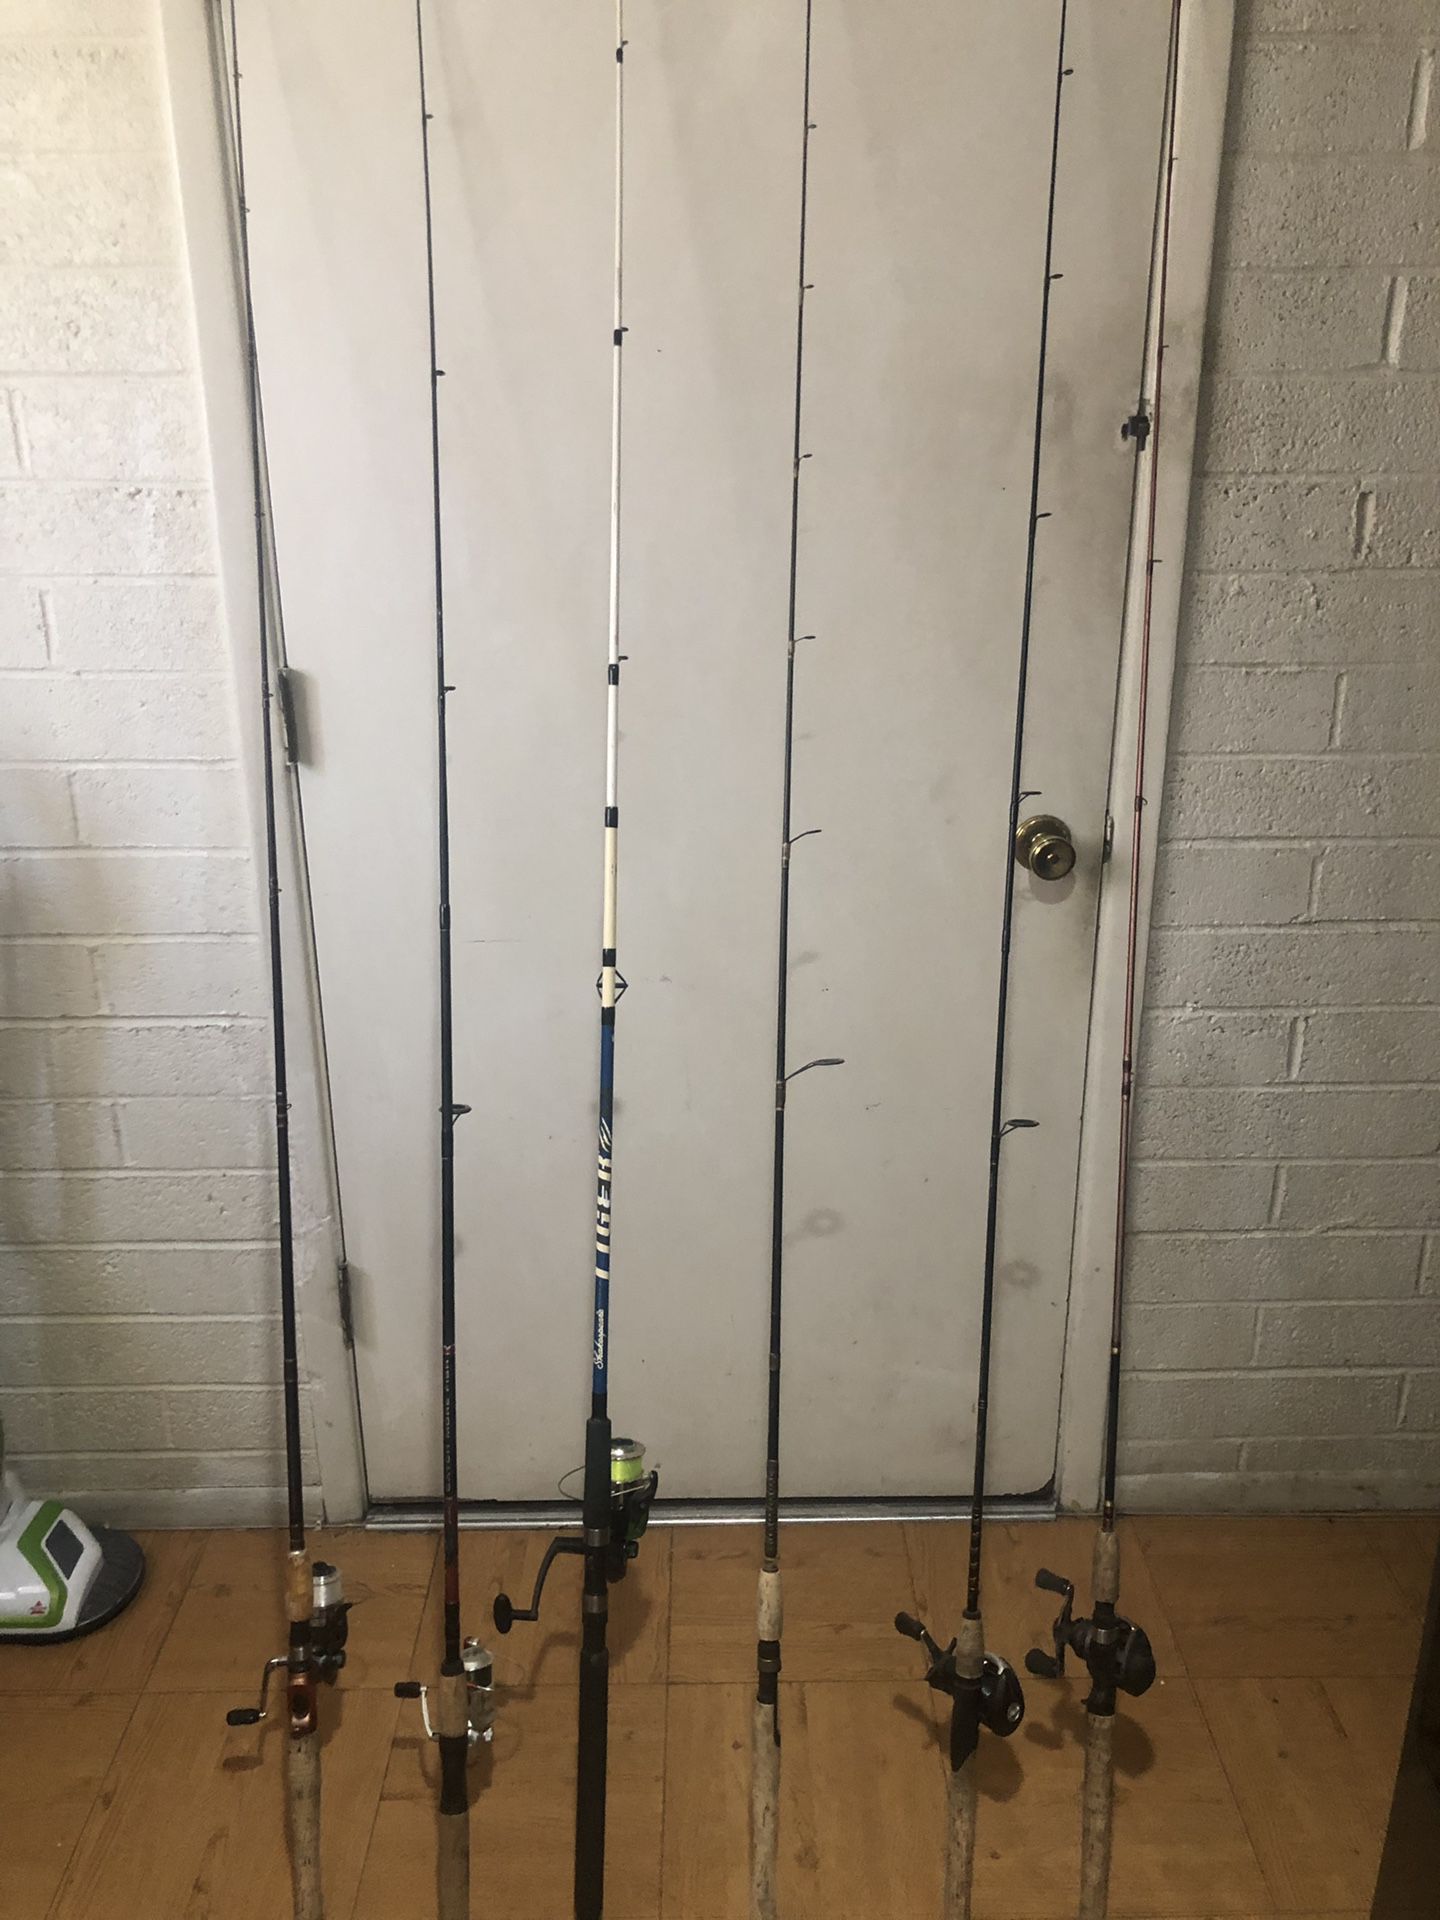 Selling my fishing equipment 3 spin rods sets and 3 bait casters 2 complete